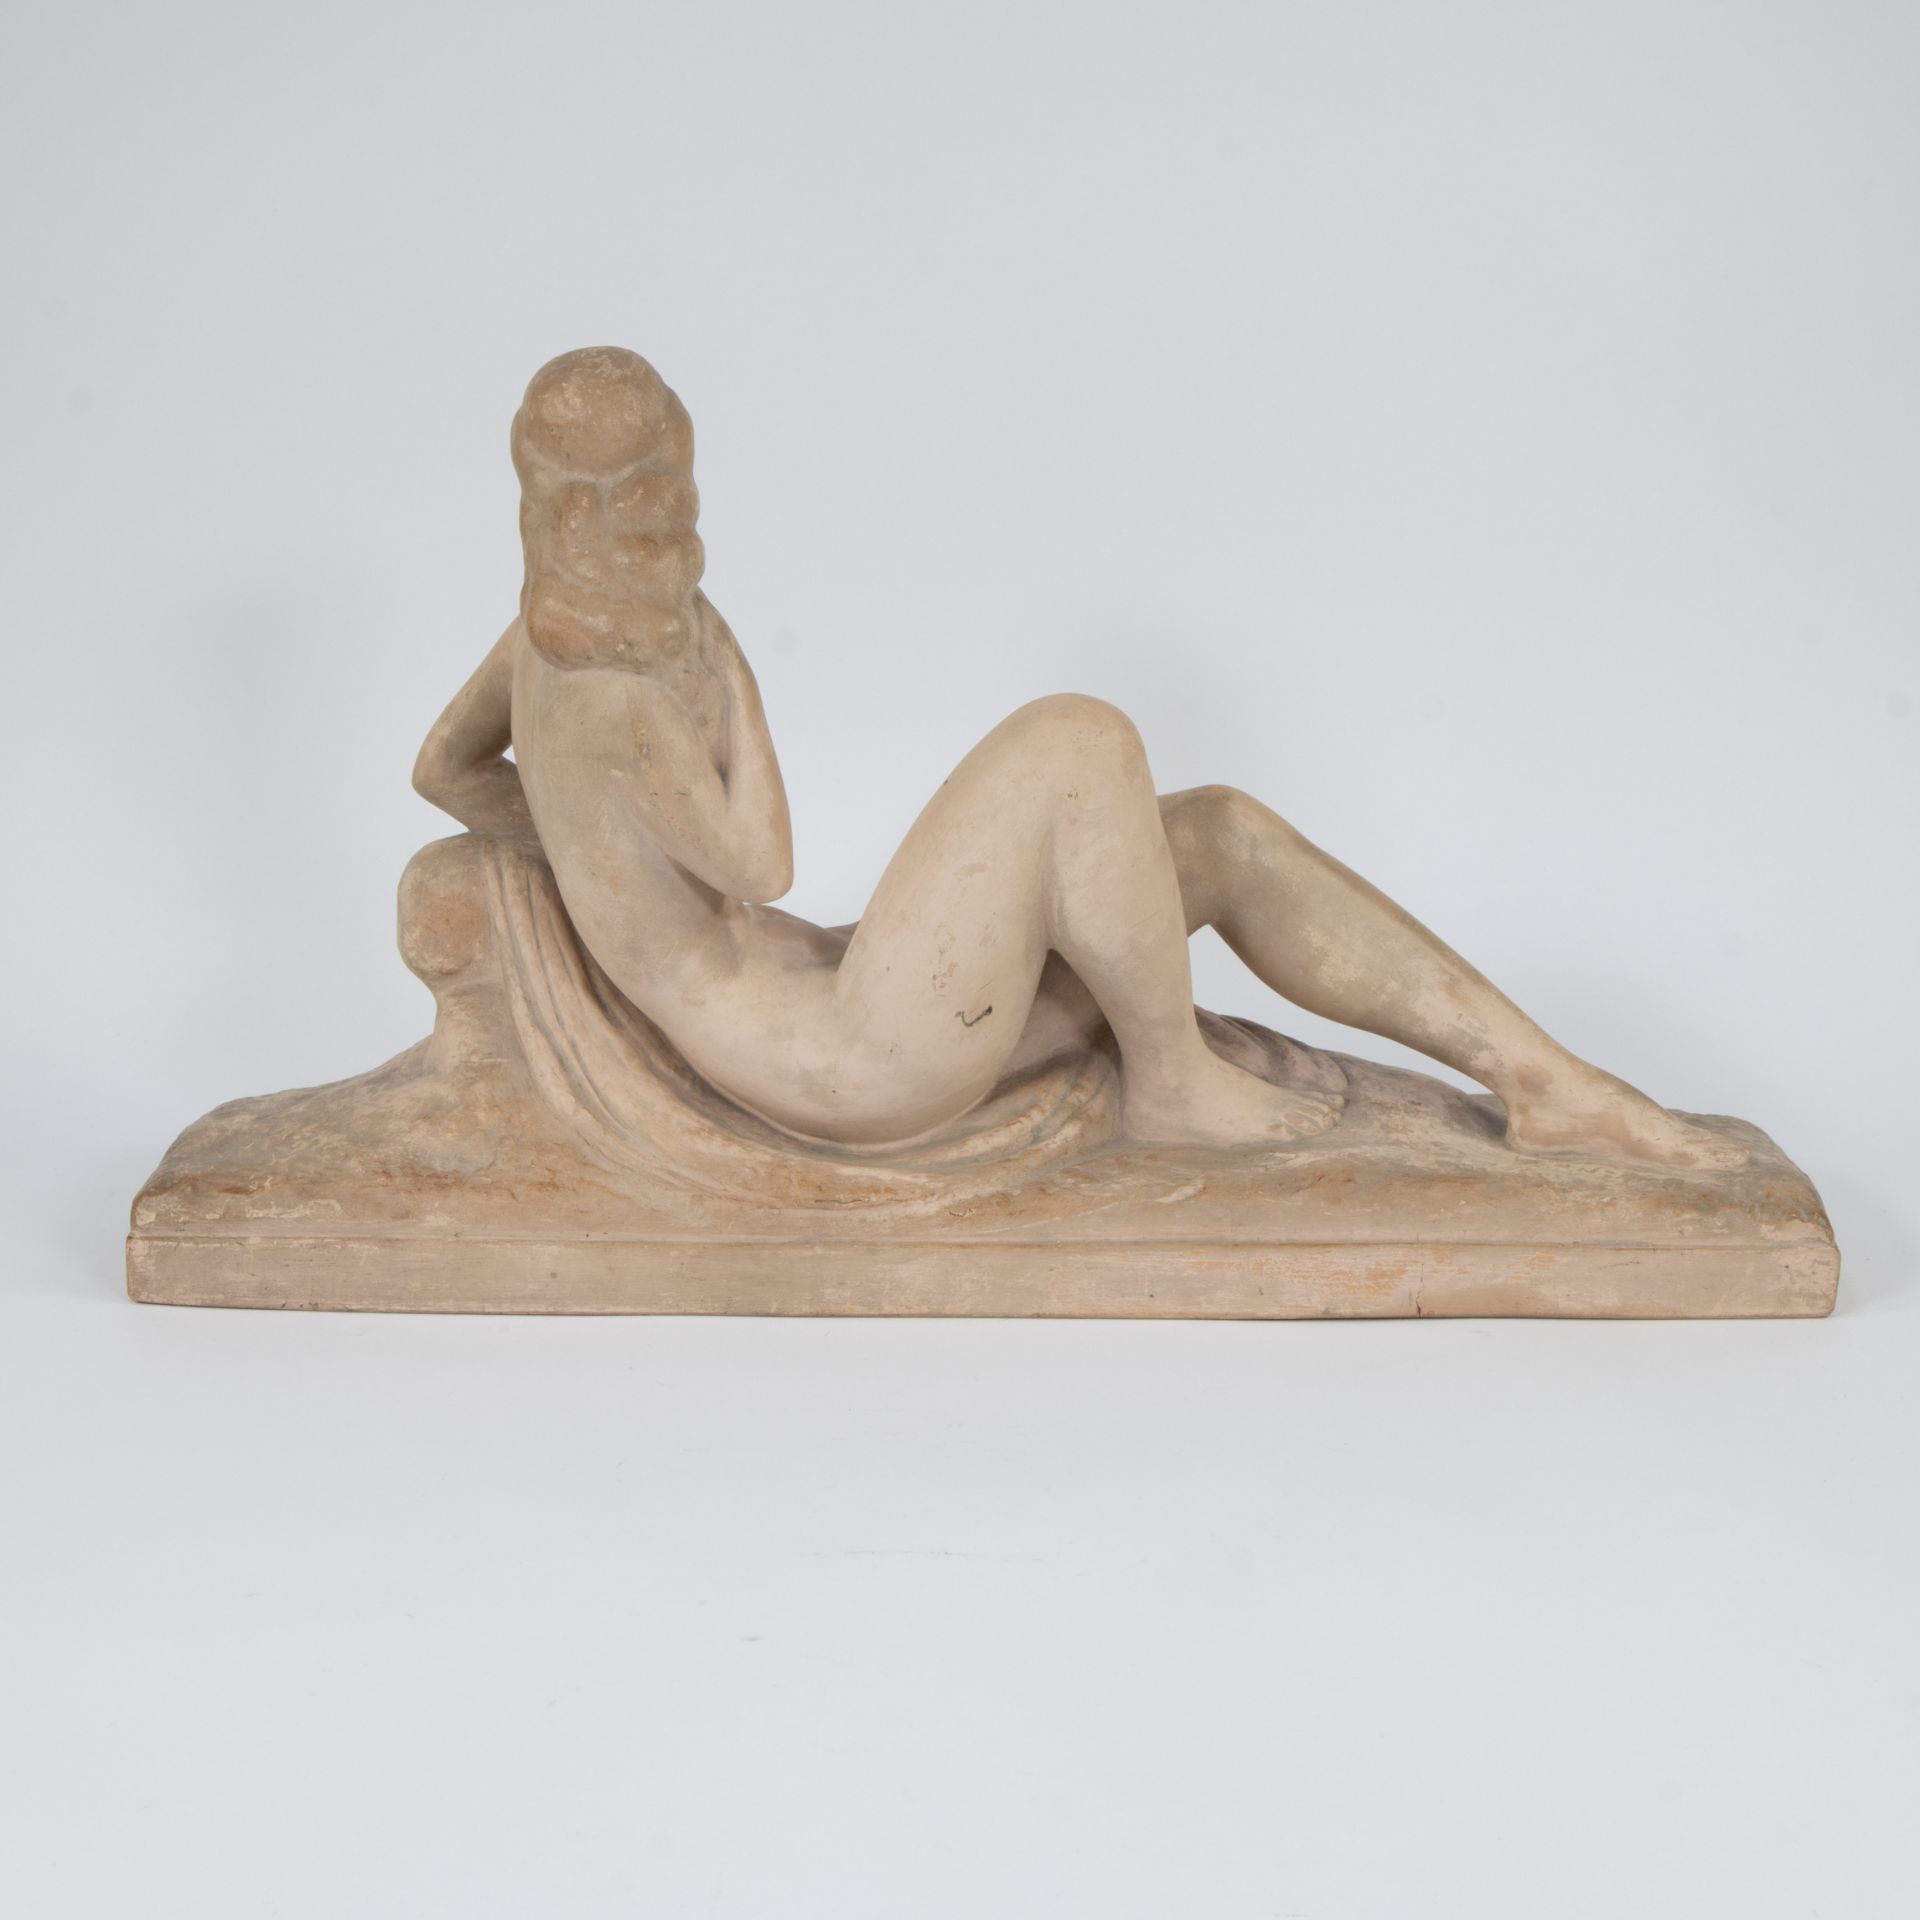 Charles LEMANCEAU (1905-1980), Art Deco sculpture in terracotta of a seated nude, signed - Image 3 of 5